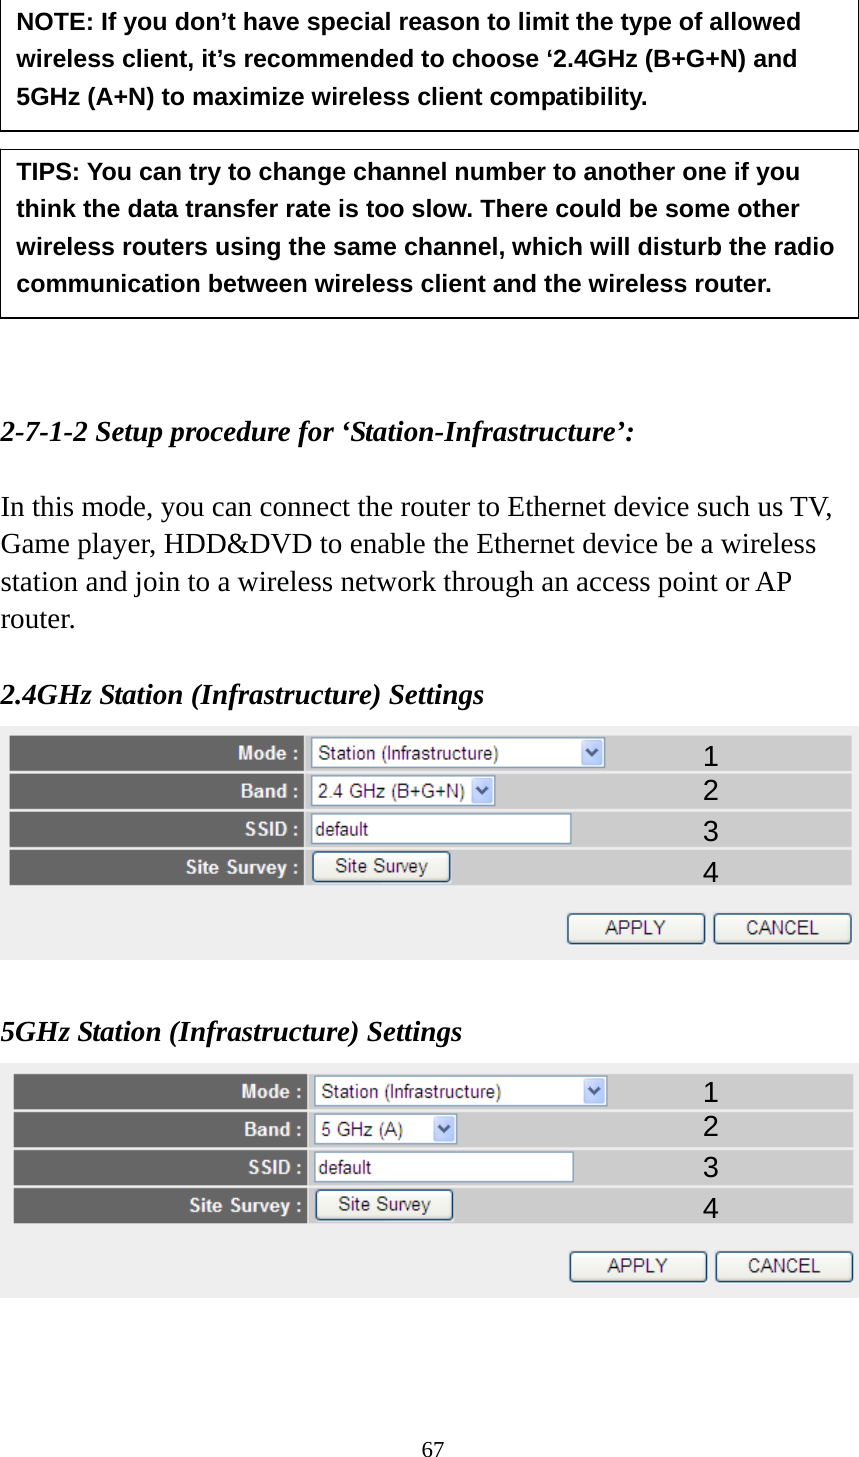 67             2-7-1-2 Setup procedure for ‘Station-Infrastructure’:  In this mode, you can connect the router to Ethernet device such us TV, Game player, HDD&amp;DVD to enable the Ethernet device be a wireless station and join to a wireless network through an access point or AP router.  2.4GHz Station (Infrastructure) Settings   5GHz Station (Infrastructure) Settings    TIPS: You can try to change channel number to another one if you think the data transfer rate is too slow. There could be some other wireless routers using the same channel, which will disturb the radio communication between wireless client and the wireless router. 1 2 3 4 NOTE: If you don’t have special reason to limit the type of allowed wireless client, it’s recommended to choose ‘2.4GHz (B+G+N) and 5GHz (A+N) to maximize wireless client compatibility. 1 2 3 4 